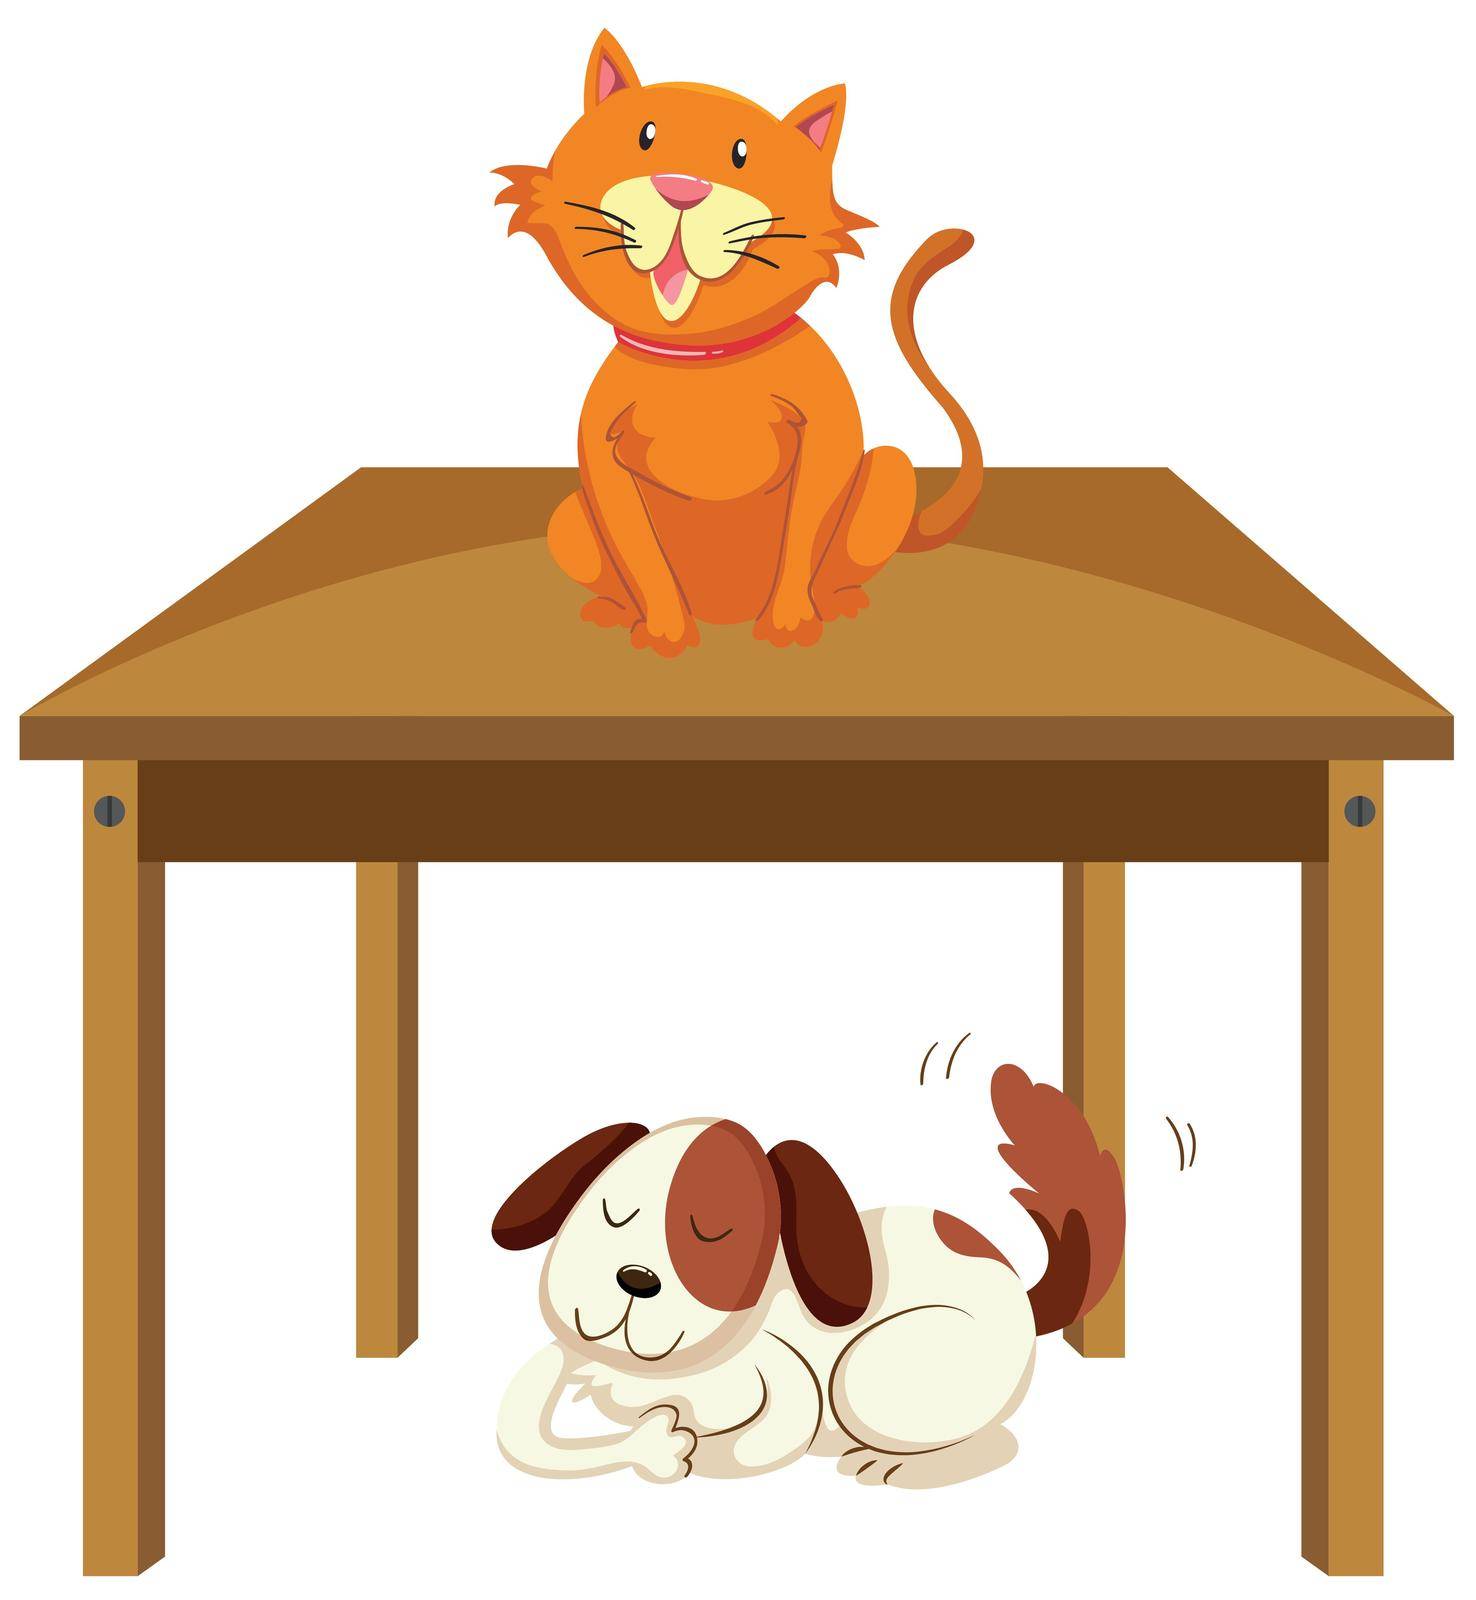 Cat on the table and dog under the table by iimages